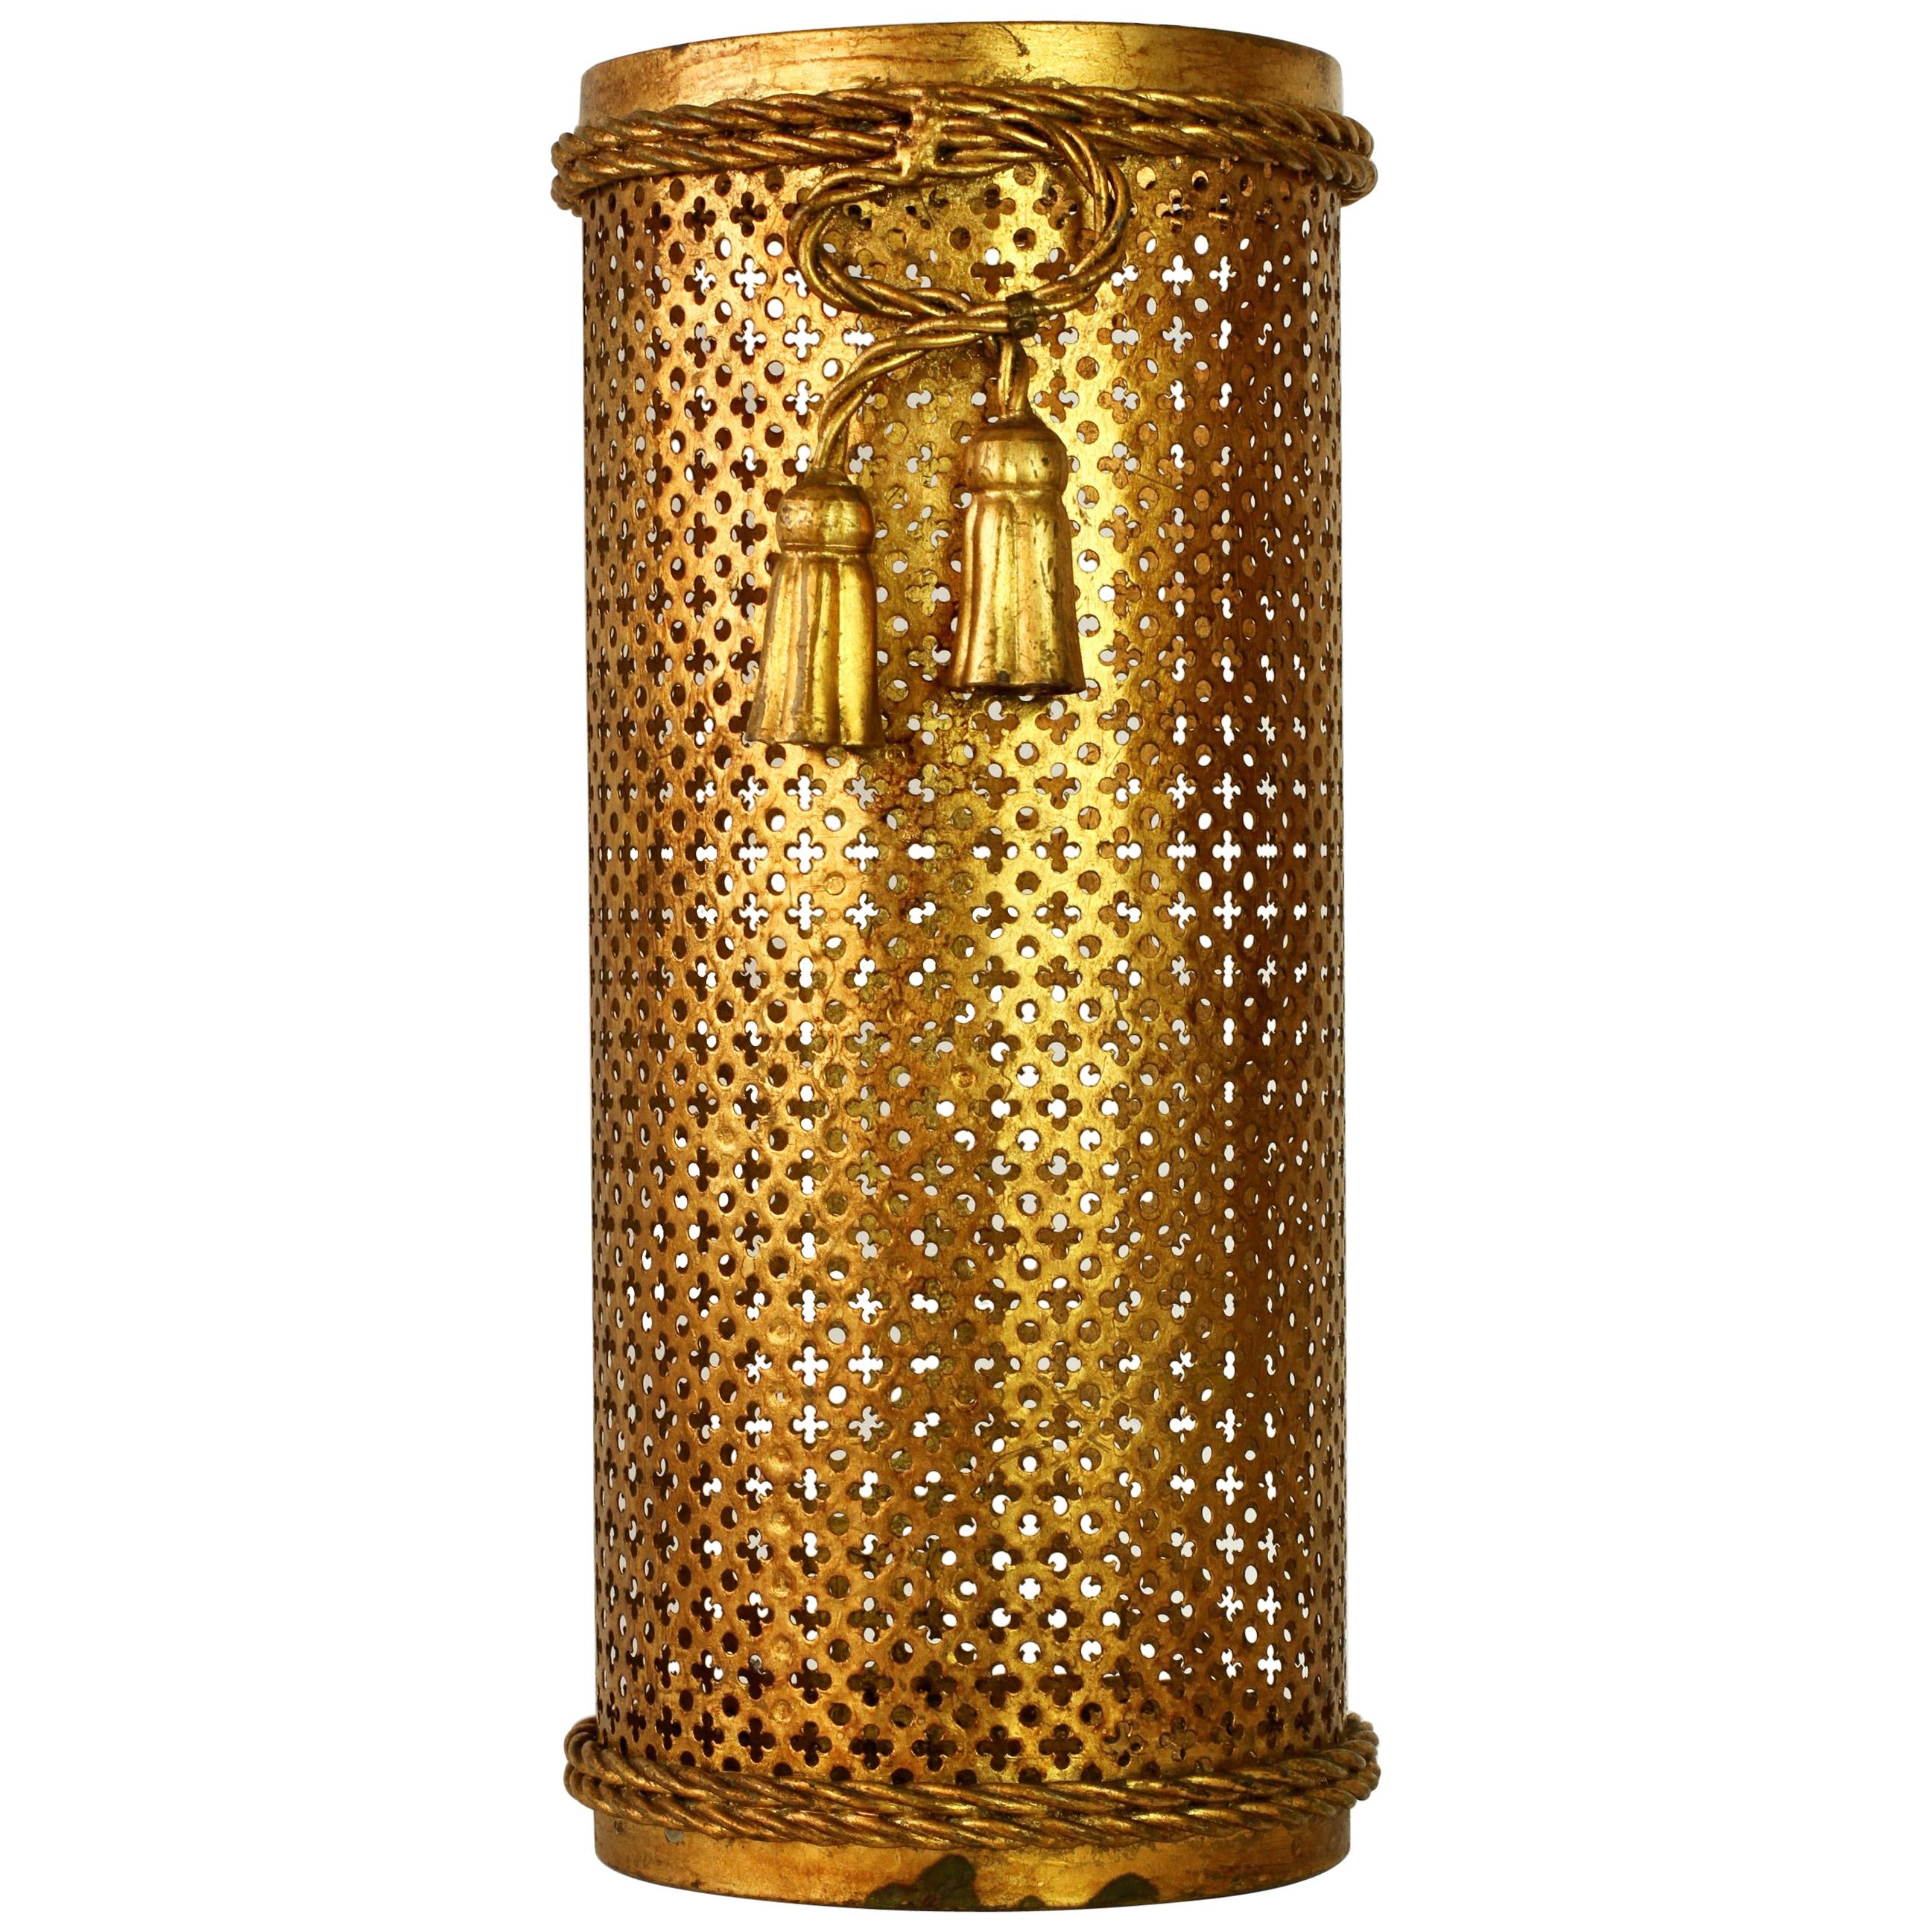 Midcentury Italian Hollywood Regency Gold Gilded Umbrella Stand or Holder, 1950s For Sale